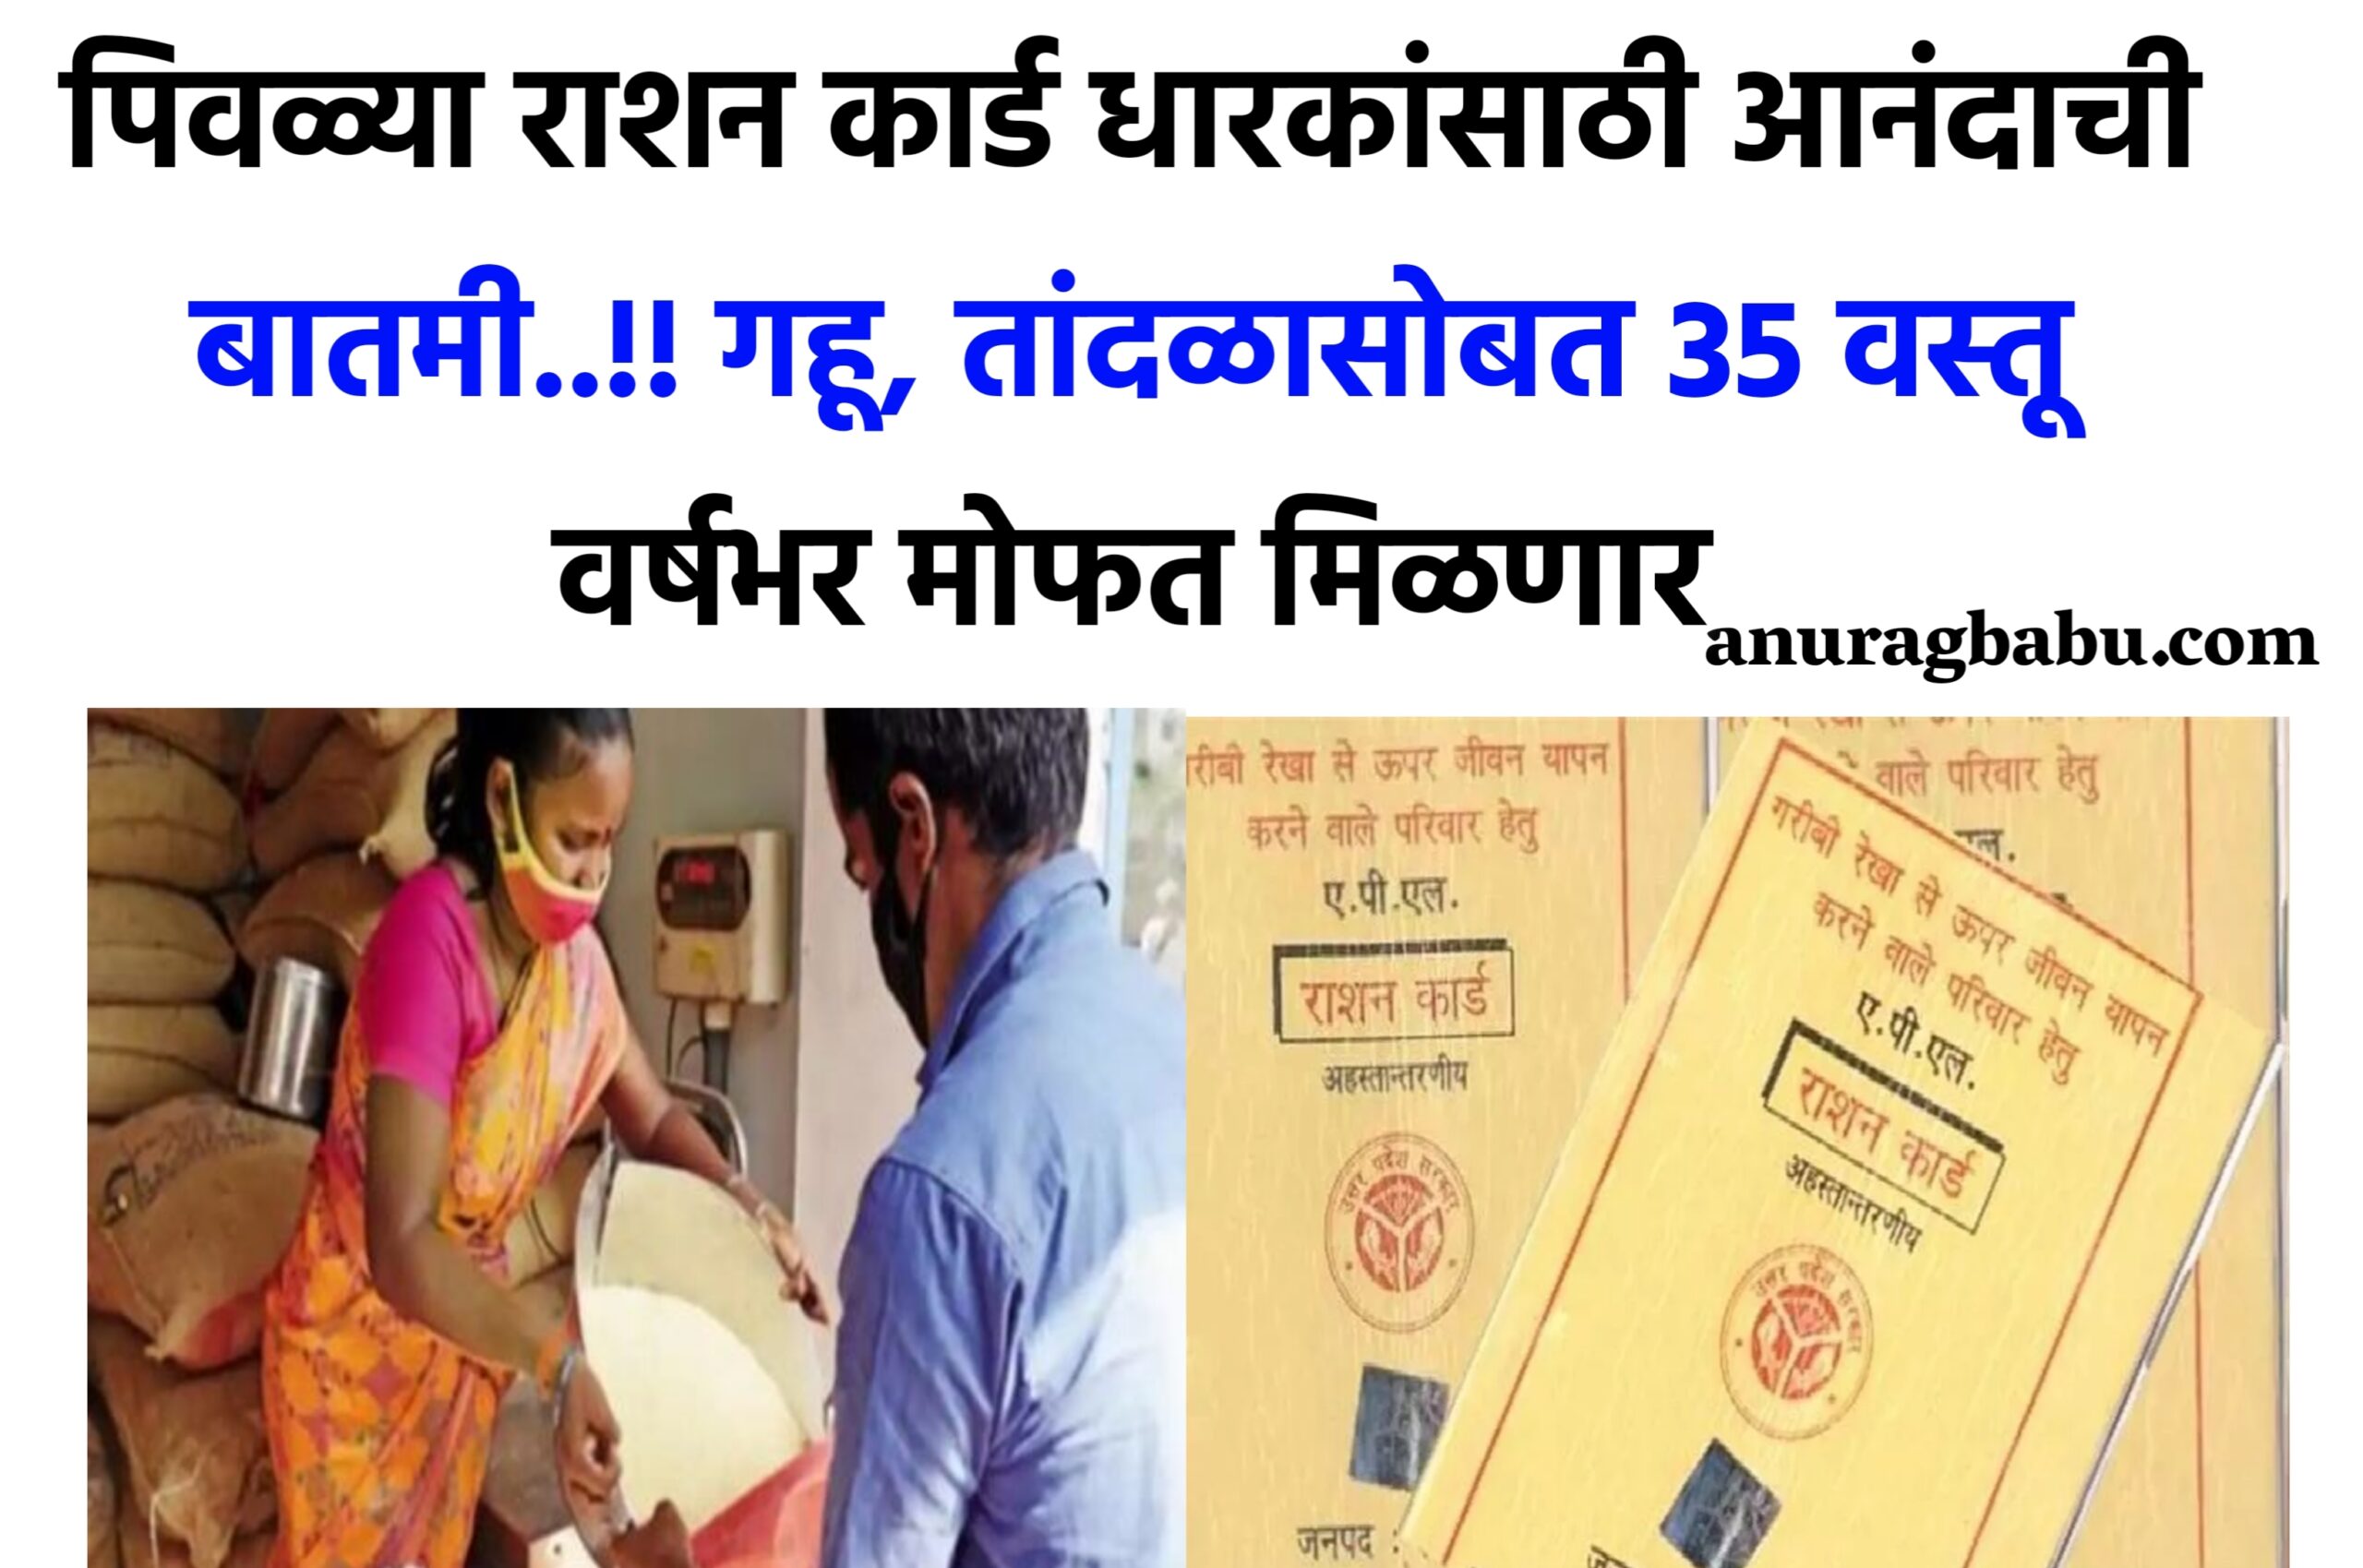 Ration card holders